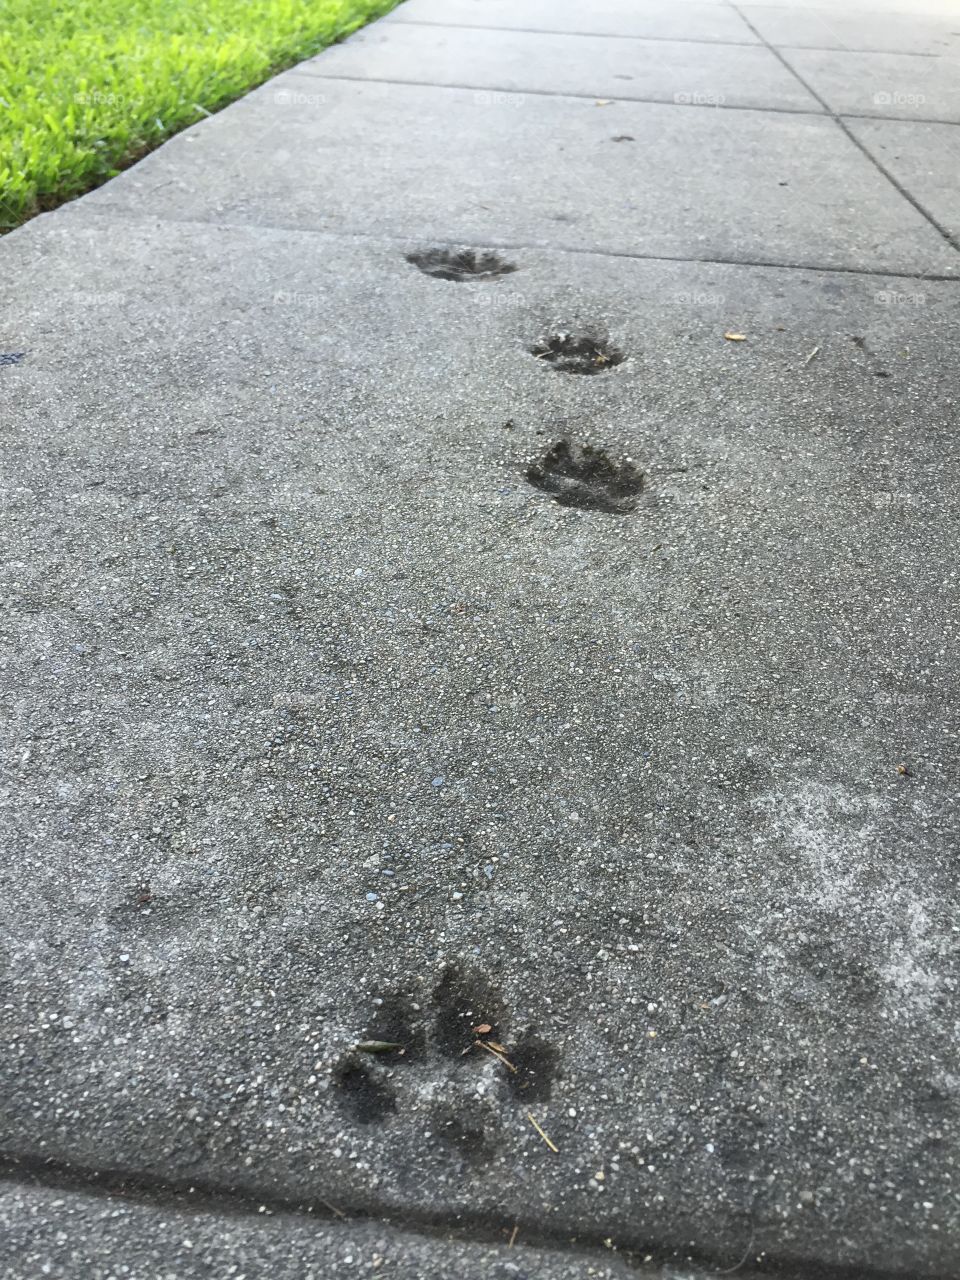 Paw prints in the concrete